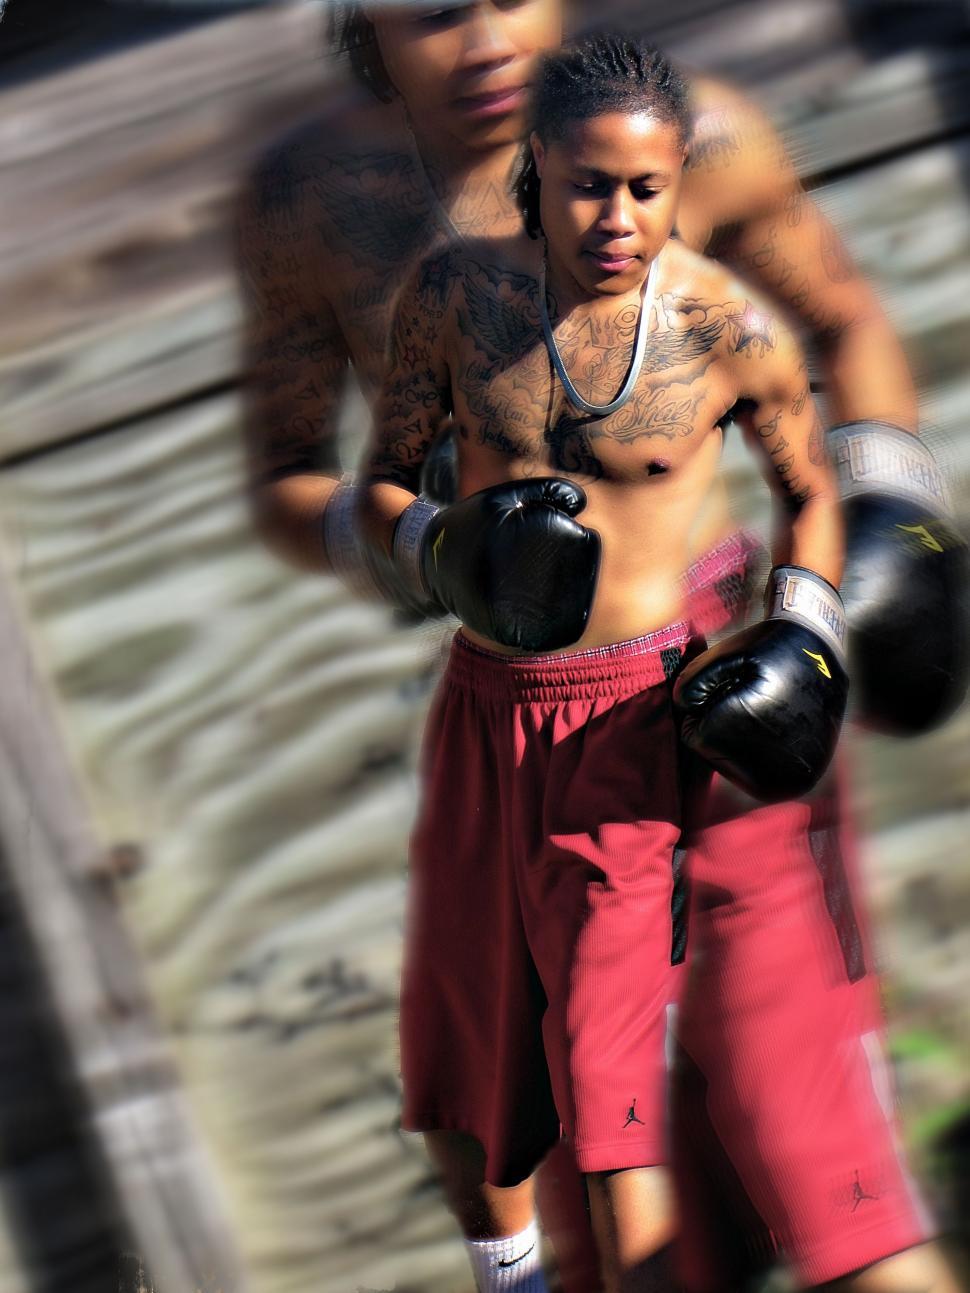 Free Image of Young Male Boxer (Sports)  